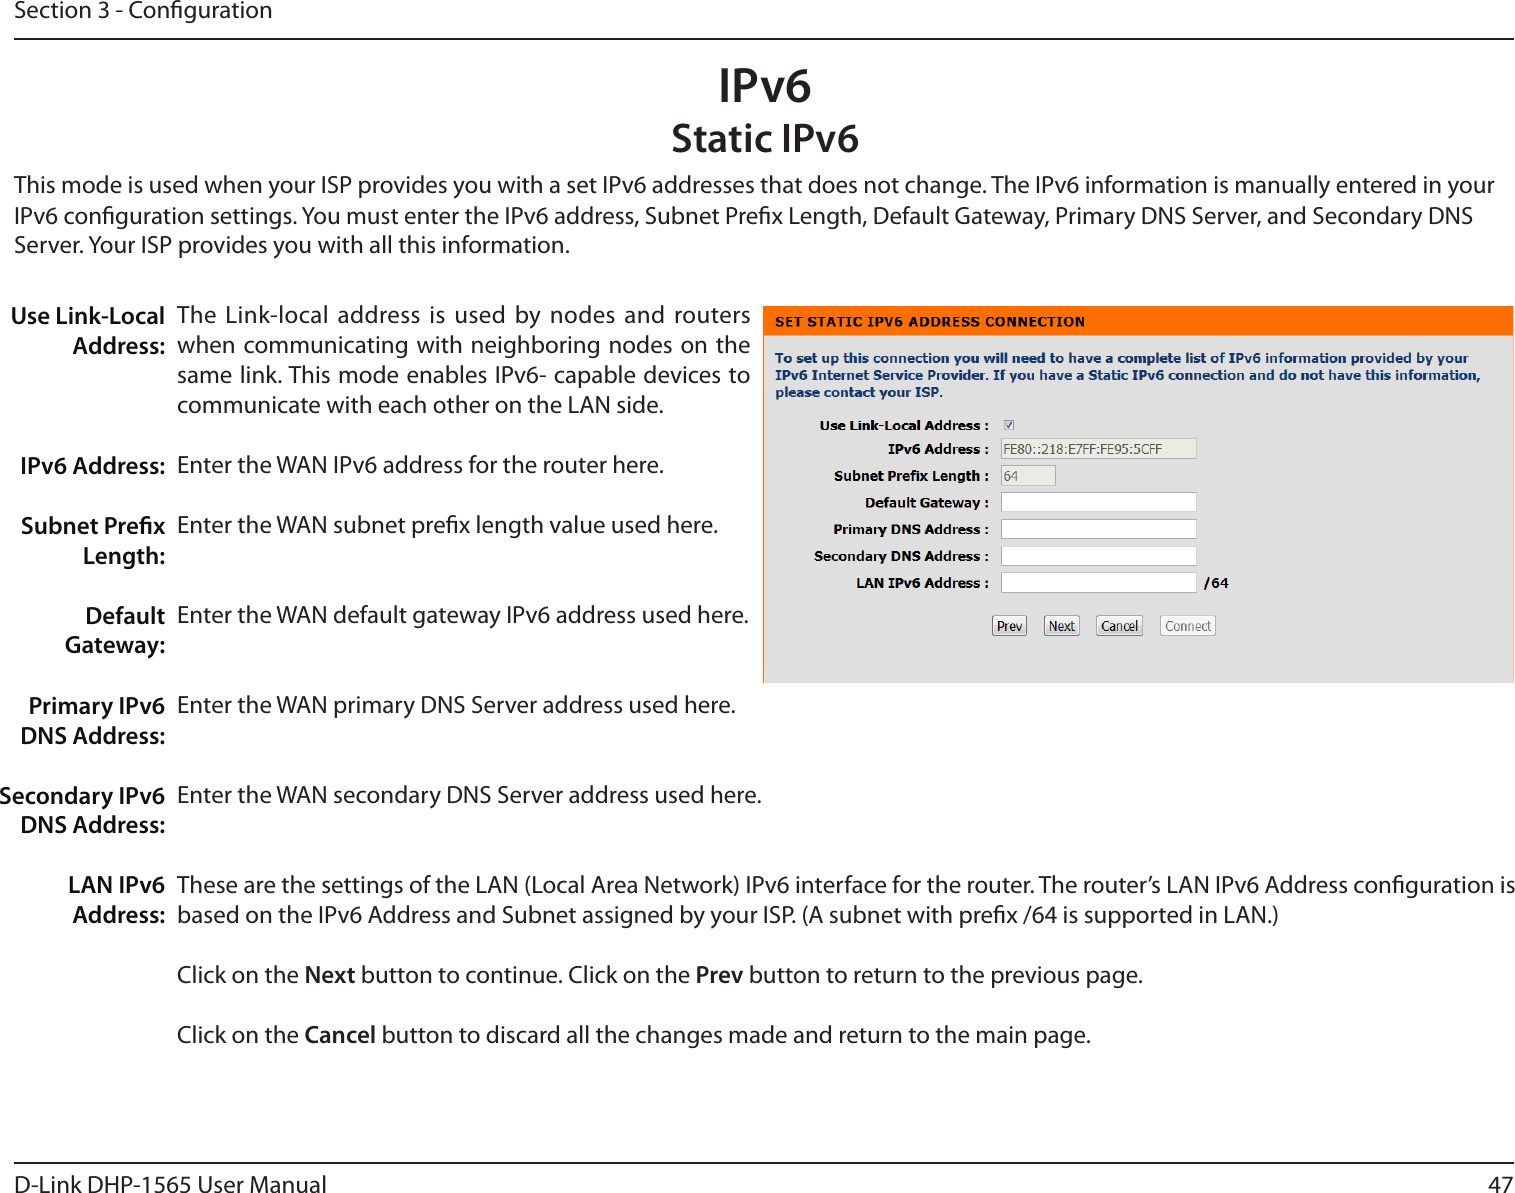 47D-Link DHP-1565 User ManualSection 3 - CongurationThis mode is used when your ISP provides you with a set IPv6 addresses that does not change. The IPv6 information is manually entered in yourIPv6 conguration settings. You must enter the IPv6 address, Subnet Prex Length, Default Gateway, Primary DNS Server, and Secondary DNSServer. Your ISP provides you with all this information.Use Link-LocalAddress:IPv6 Address:Subnet PrexLength:Default Gateway:Primary IPv6 DNS Address:Secondary IPv6 DNS Address:LAN IPv6 Address:The Link-local address is used by nodes and routers when communicating with neighboring nodes on the same link. This mode enables IPv6- capable devices to communicate with each other on the LAN side.Enter the WAN IPv6 address for the router here.Enter the WAN subnet prex length value used here.Enter the WAN default gateway IPv6 address used here.Enter the WAN primary DNS Server address used here.Enter the WAN secondary DNS Server address used here.These are the settings of the LAN (Local Area Network) IPv6 interface for the router. The router’s LAN IPv6 Address conguration is based on the IPv6 Address and Subnet assigned by your ISP. (A subnet with prex /64 is supported in LAN.)Click on the Next button to continue. Click on the Prev button to return to the previous page.Click on the Cancel button to discard all the changes made and return to the main page.IPv6Static IPv6